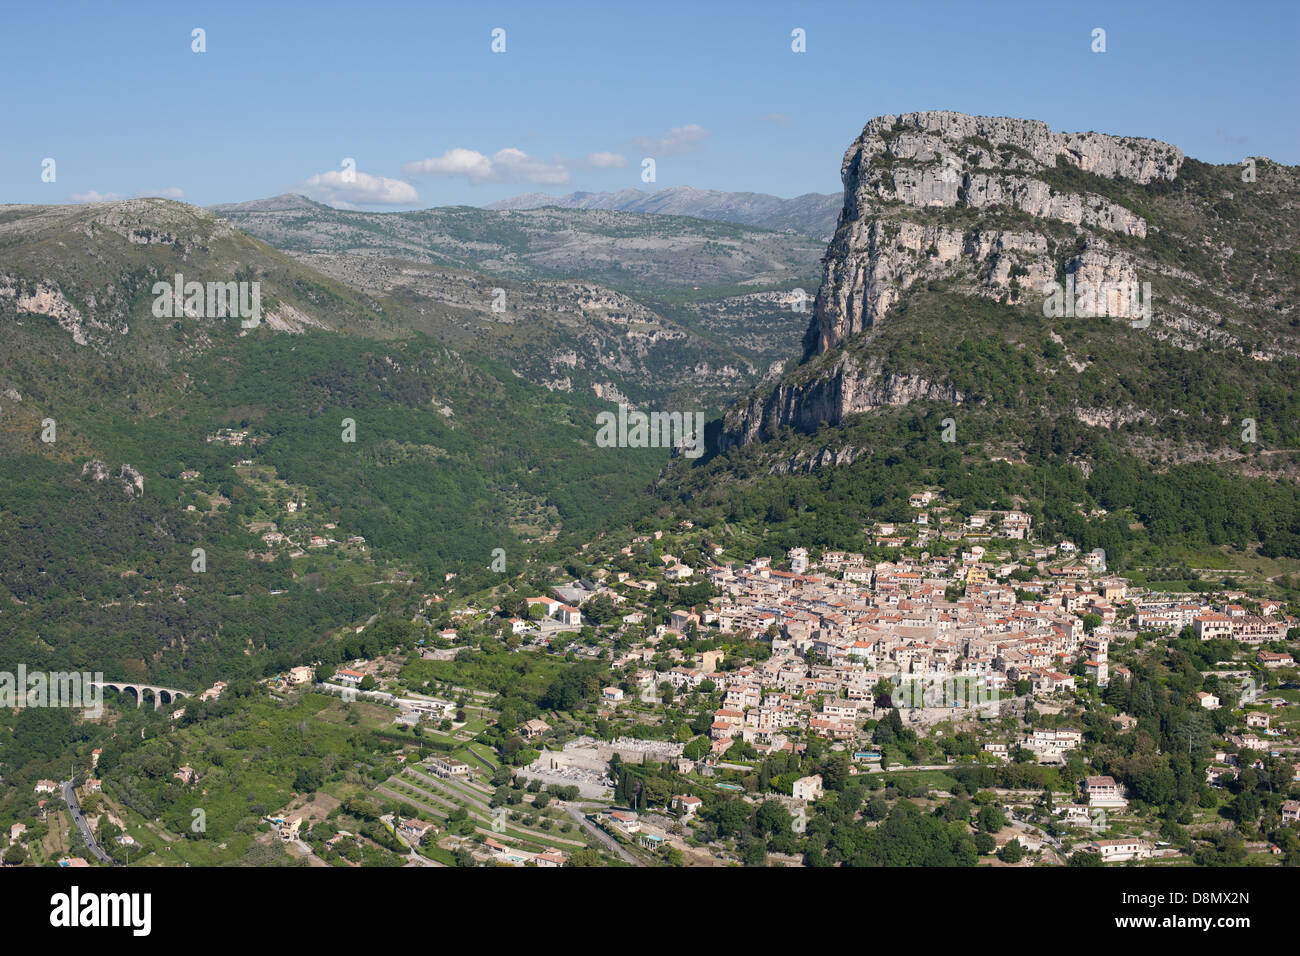 AERIAL VIEW. Medieval village at the foot of a massive 400-meter-high cliff. Saint-Jeannet, French Riviera, Alpes-Maritimes, France. Stock Photo